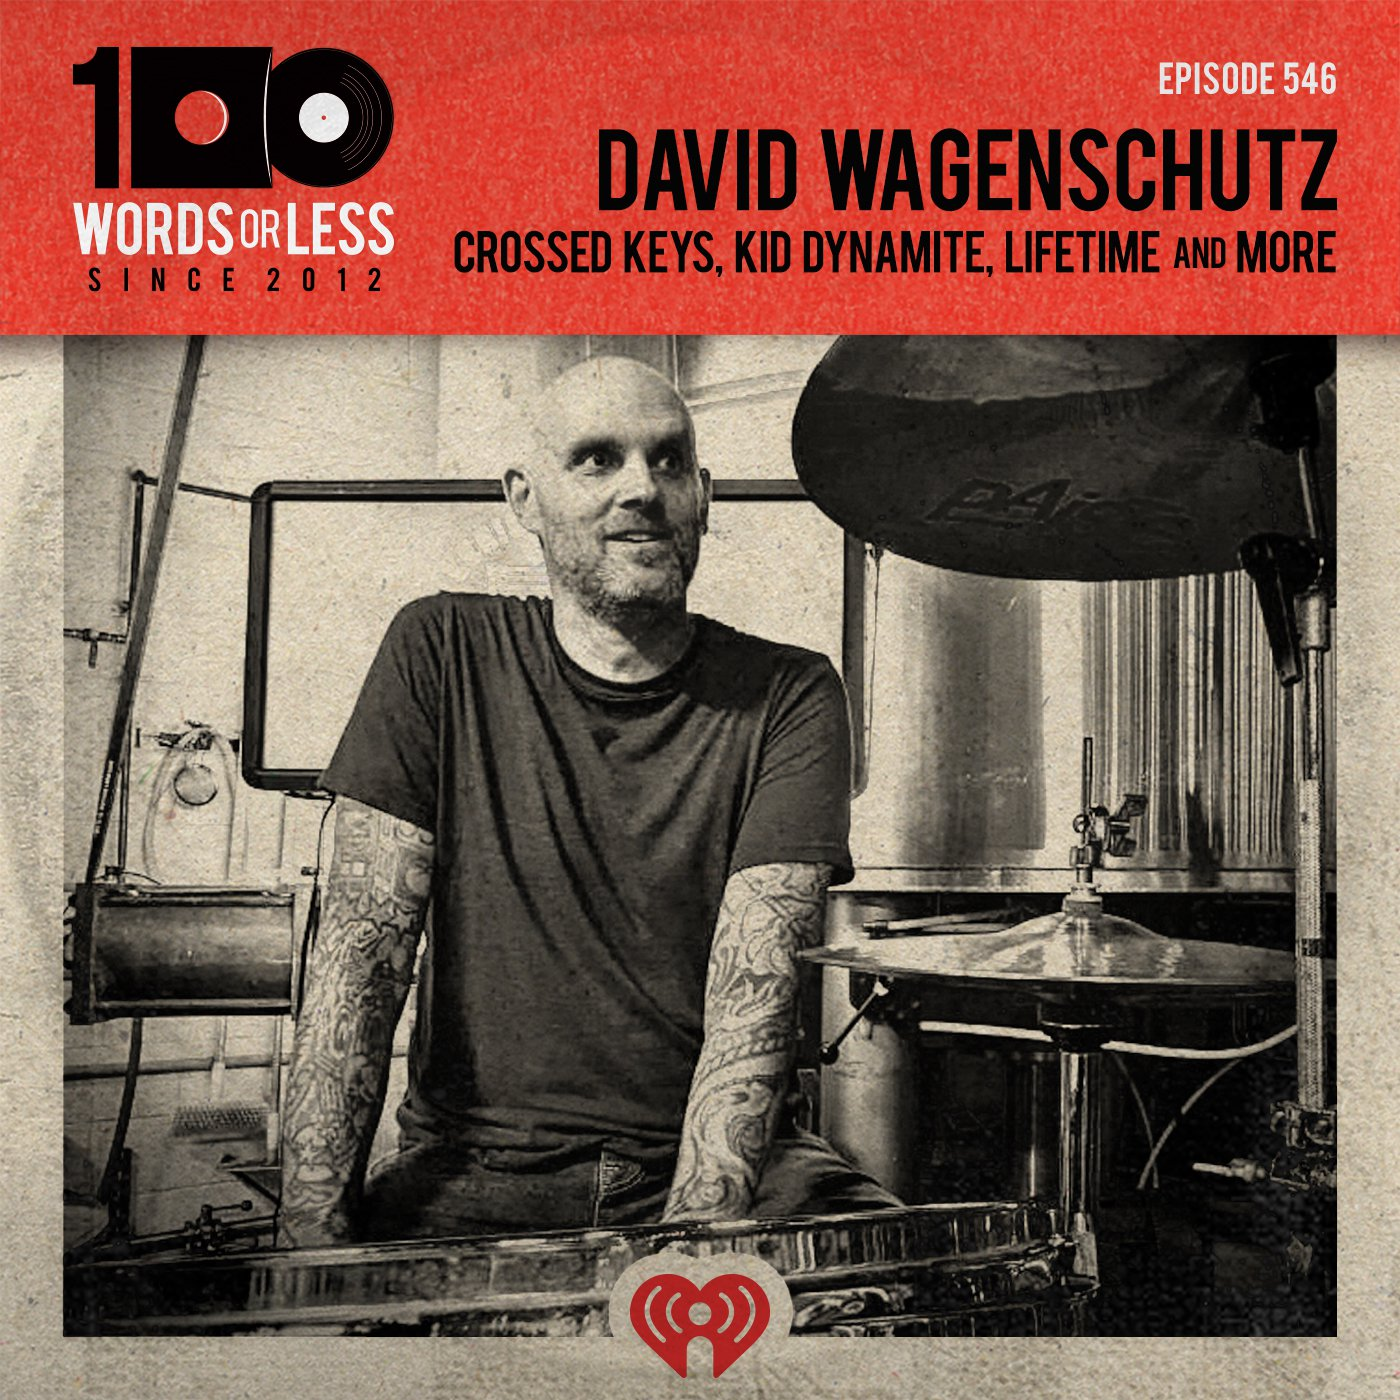 David Wagenschutz from Crossed Keys, Kid Dynamite, Lifetime and more